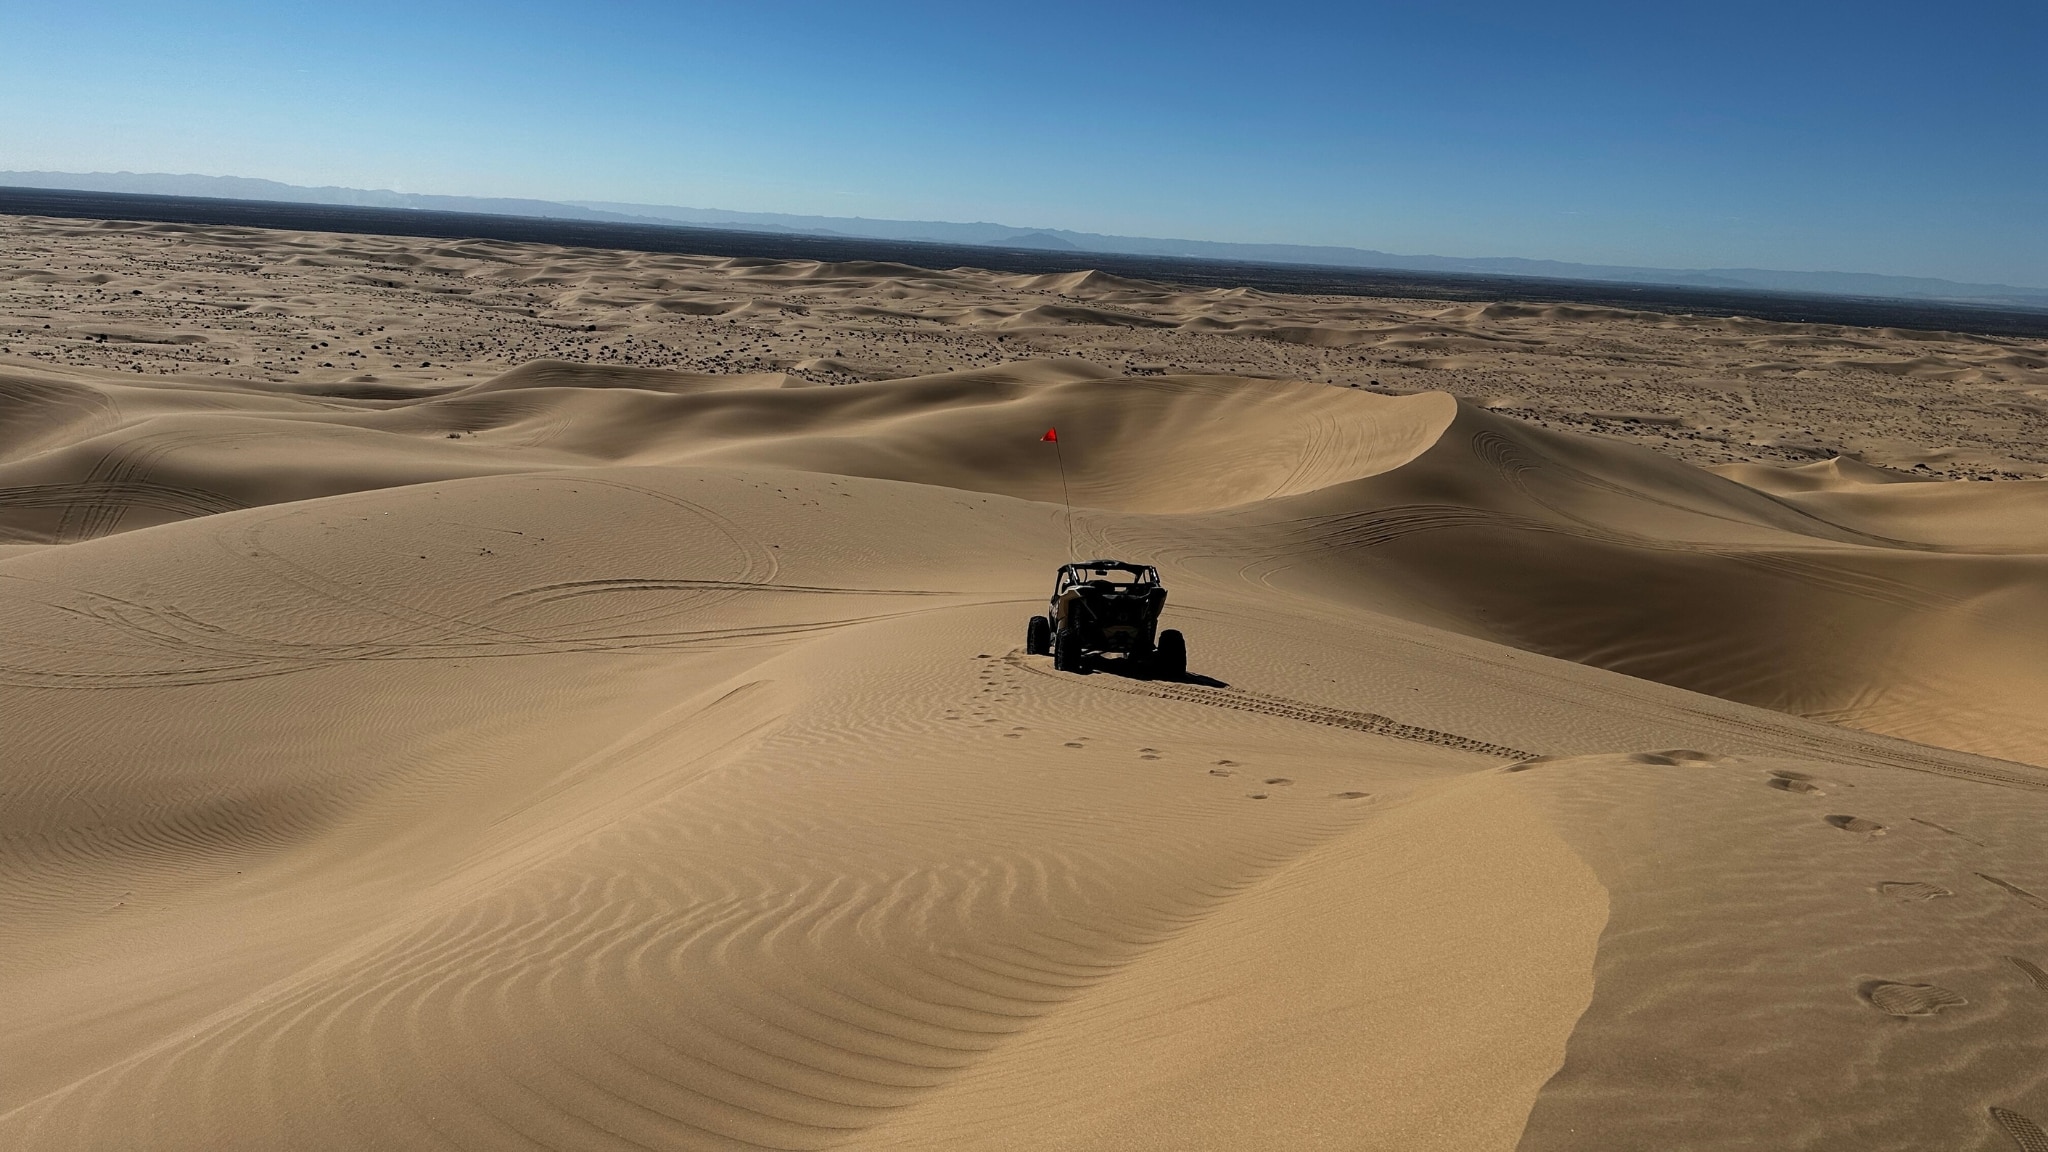 riding sand dunes in California on a Can-Am